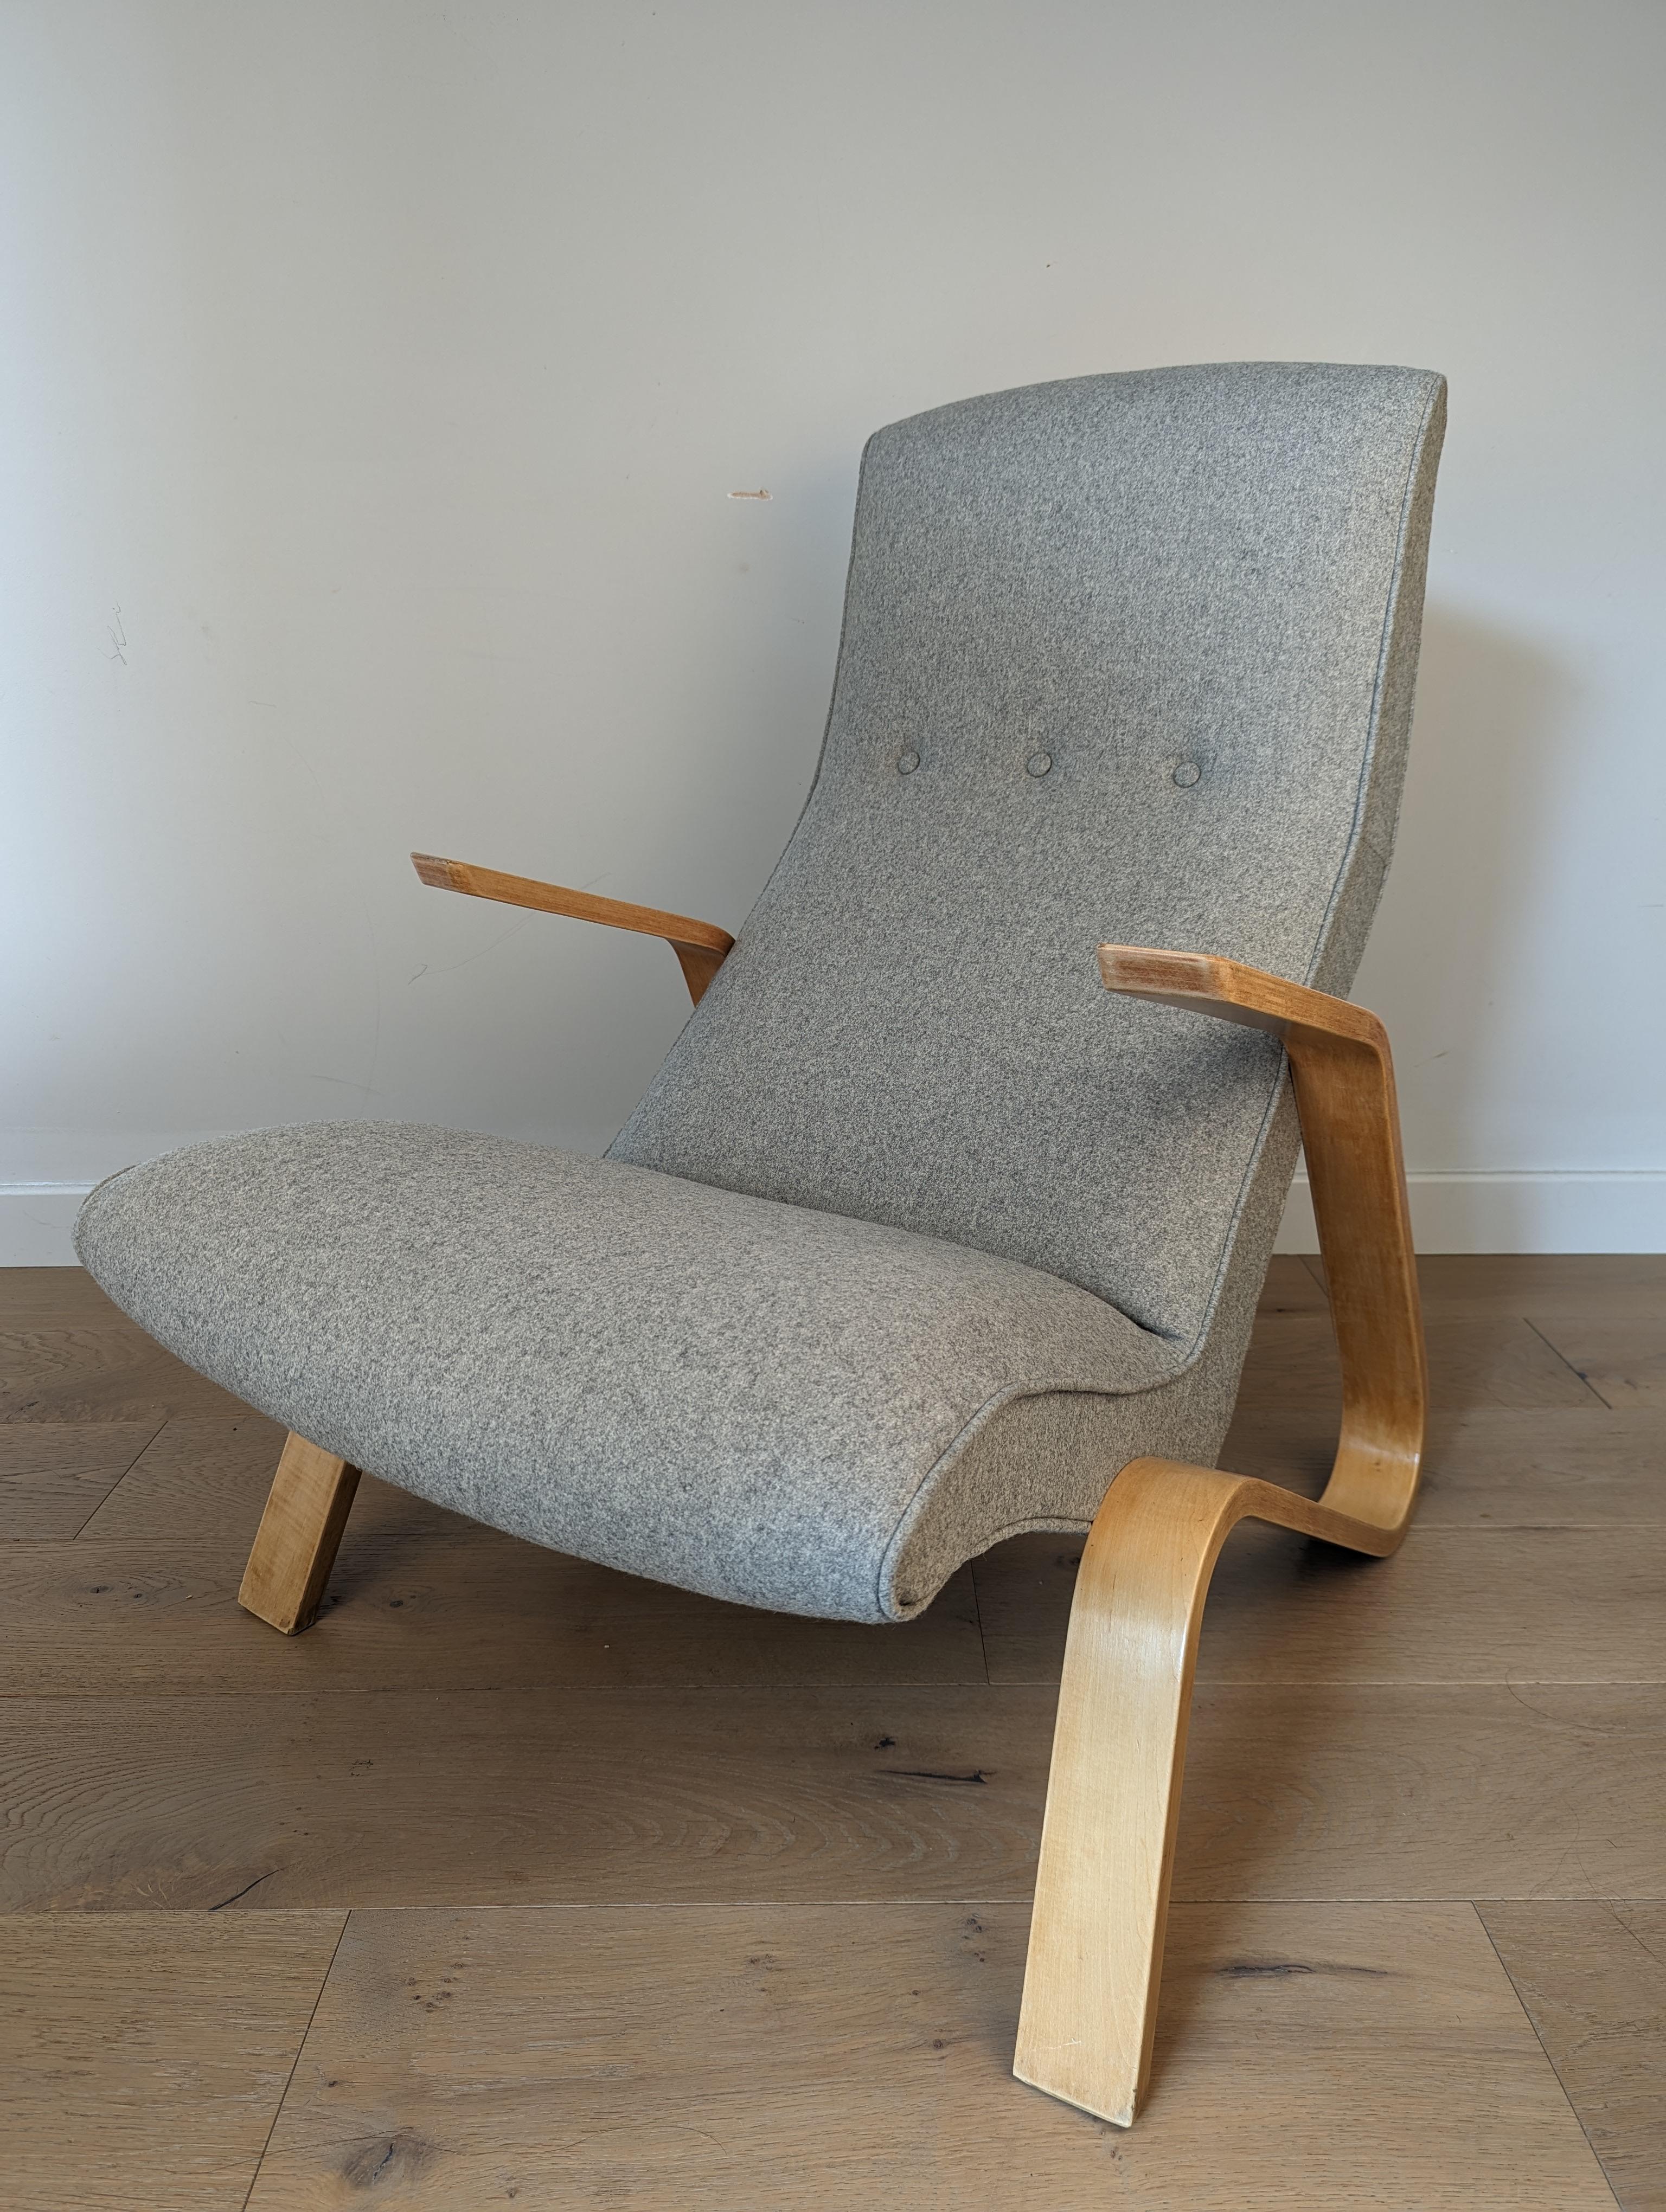 Mid-century Grasshopper chair by Eero Saarinen for Knoll (1950s) In Good Condition For Sale In Tunbridge Wells, GB